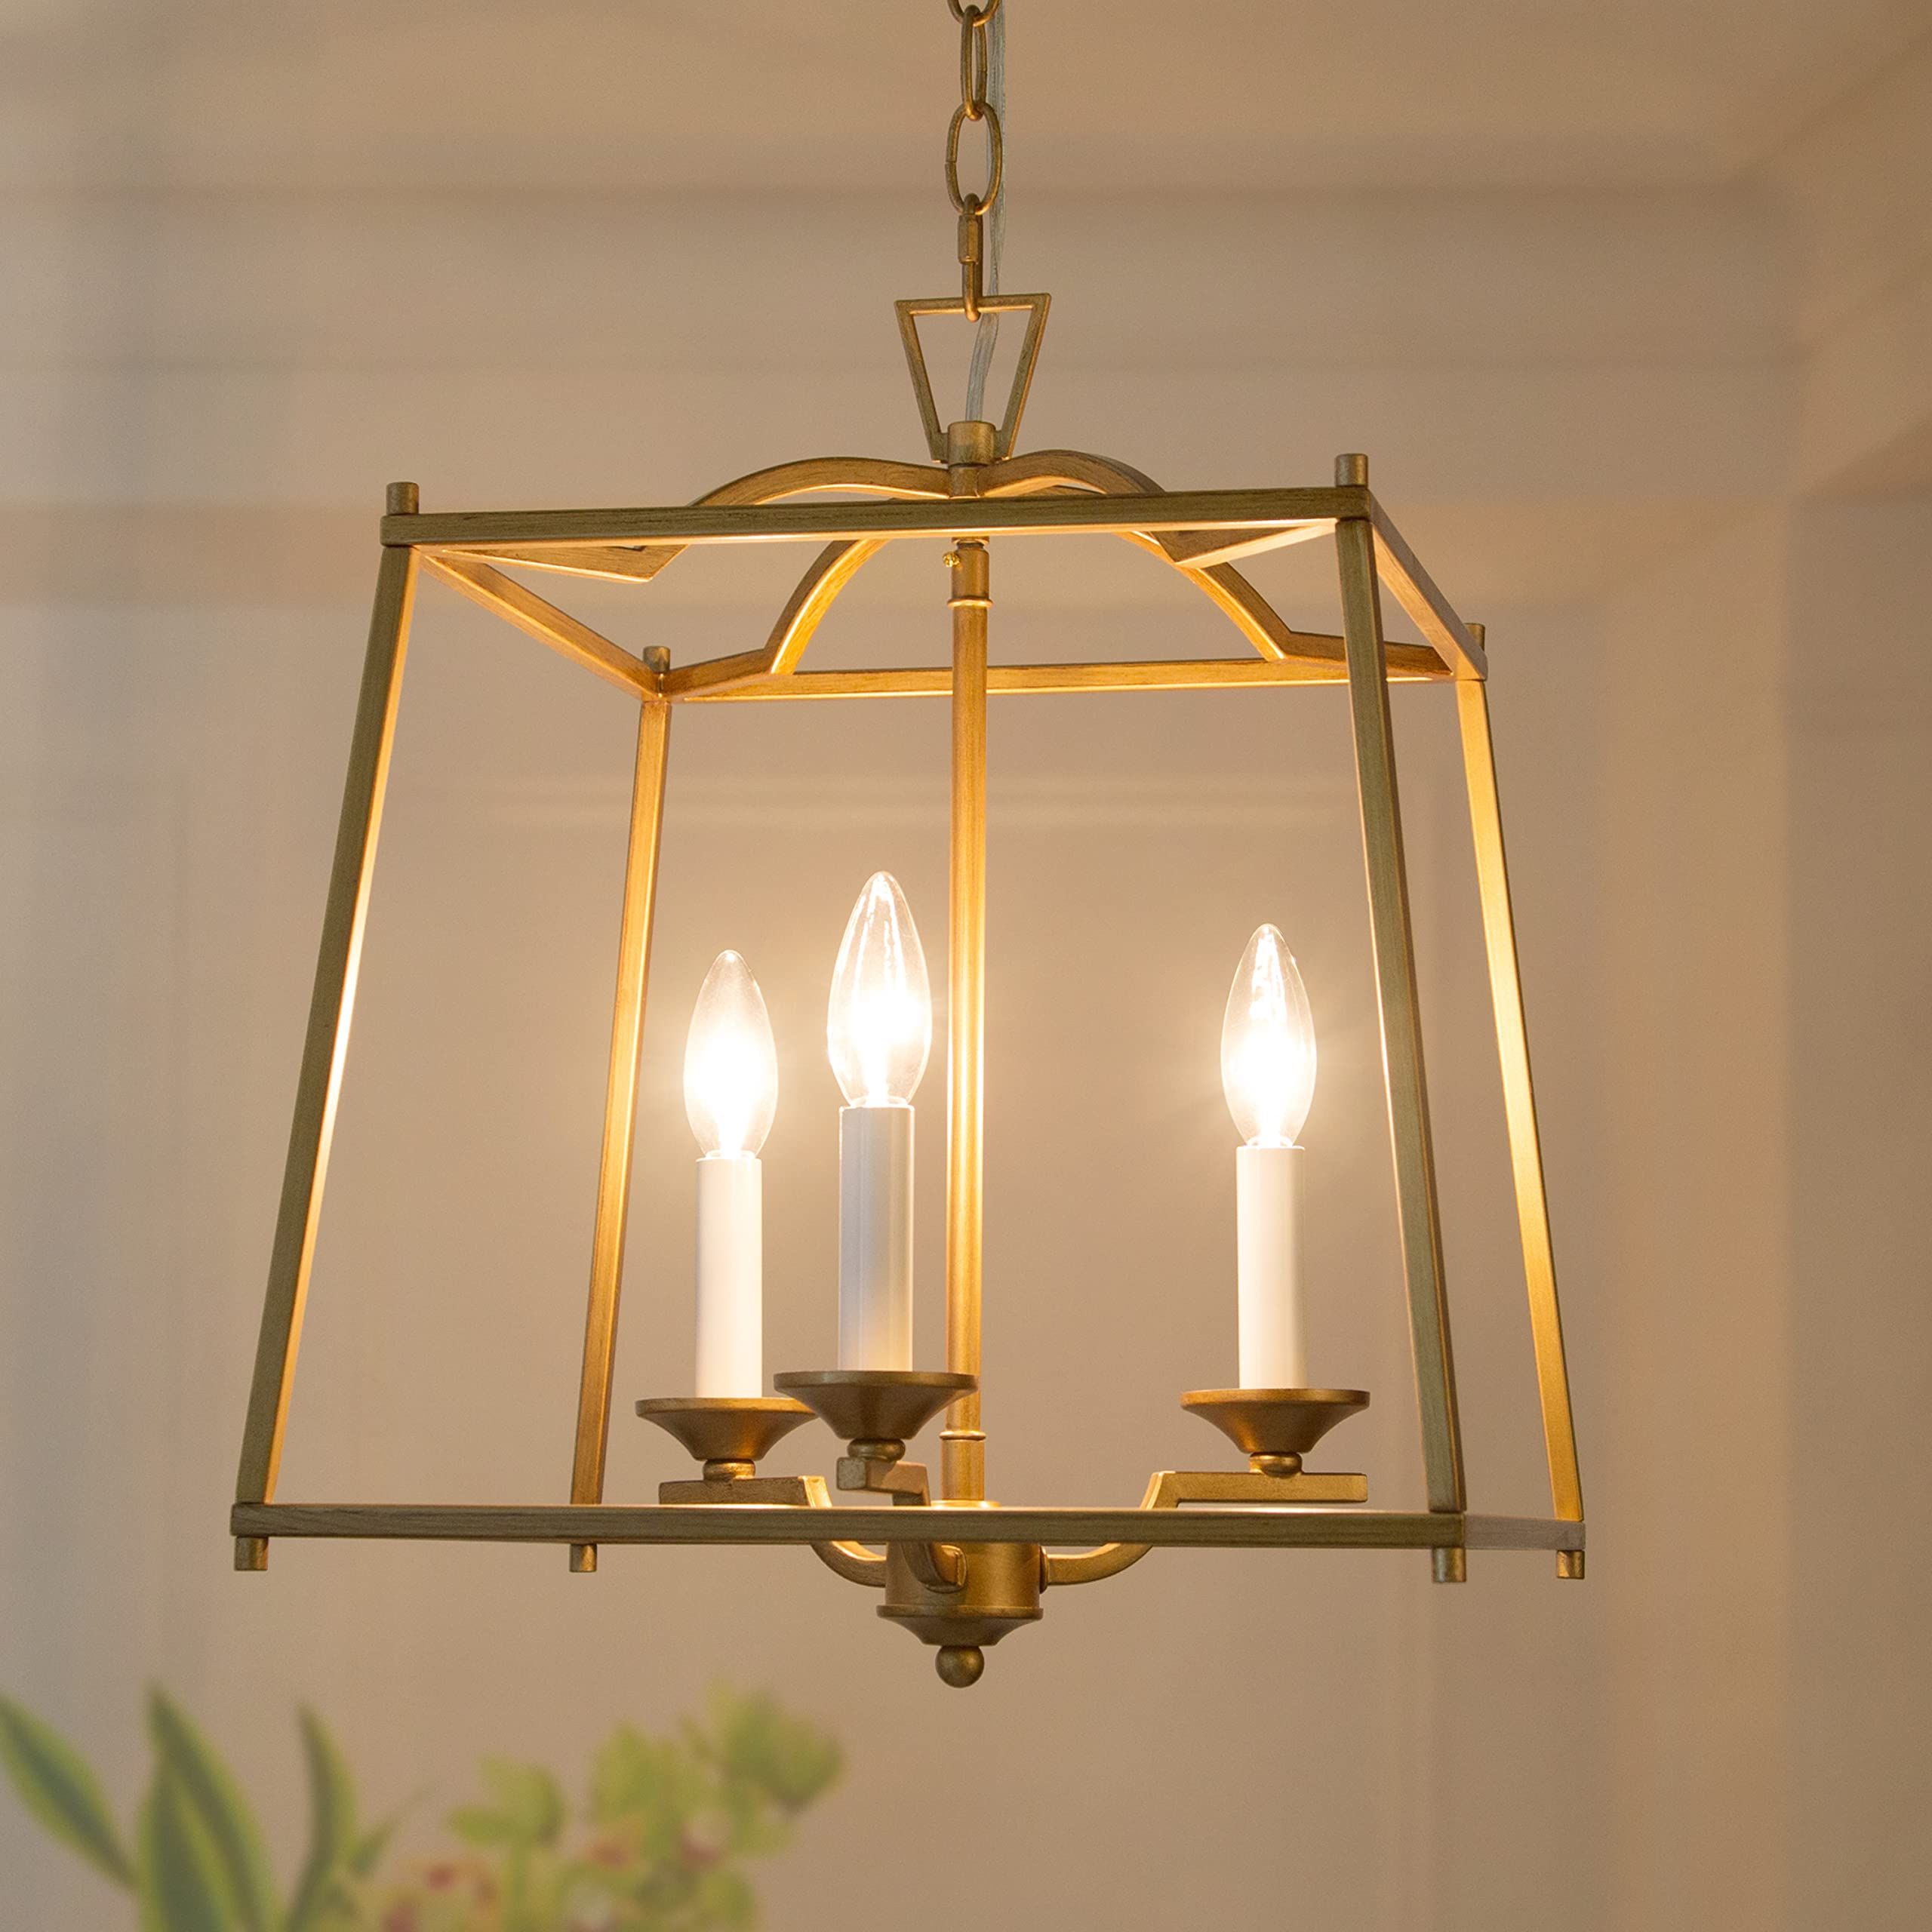 Gold Lantern Chandelier, Gold Pendant Lighting For Kitchen Island With Antique  Gold Finish, Foyer Hanging Light Fixture For Dining Room, Entryway,  Kitchen,  (View 5 of 10)